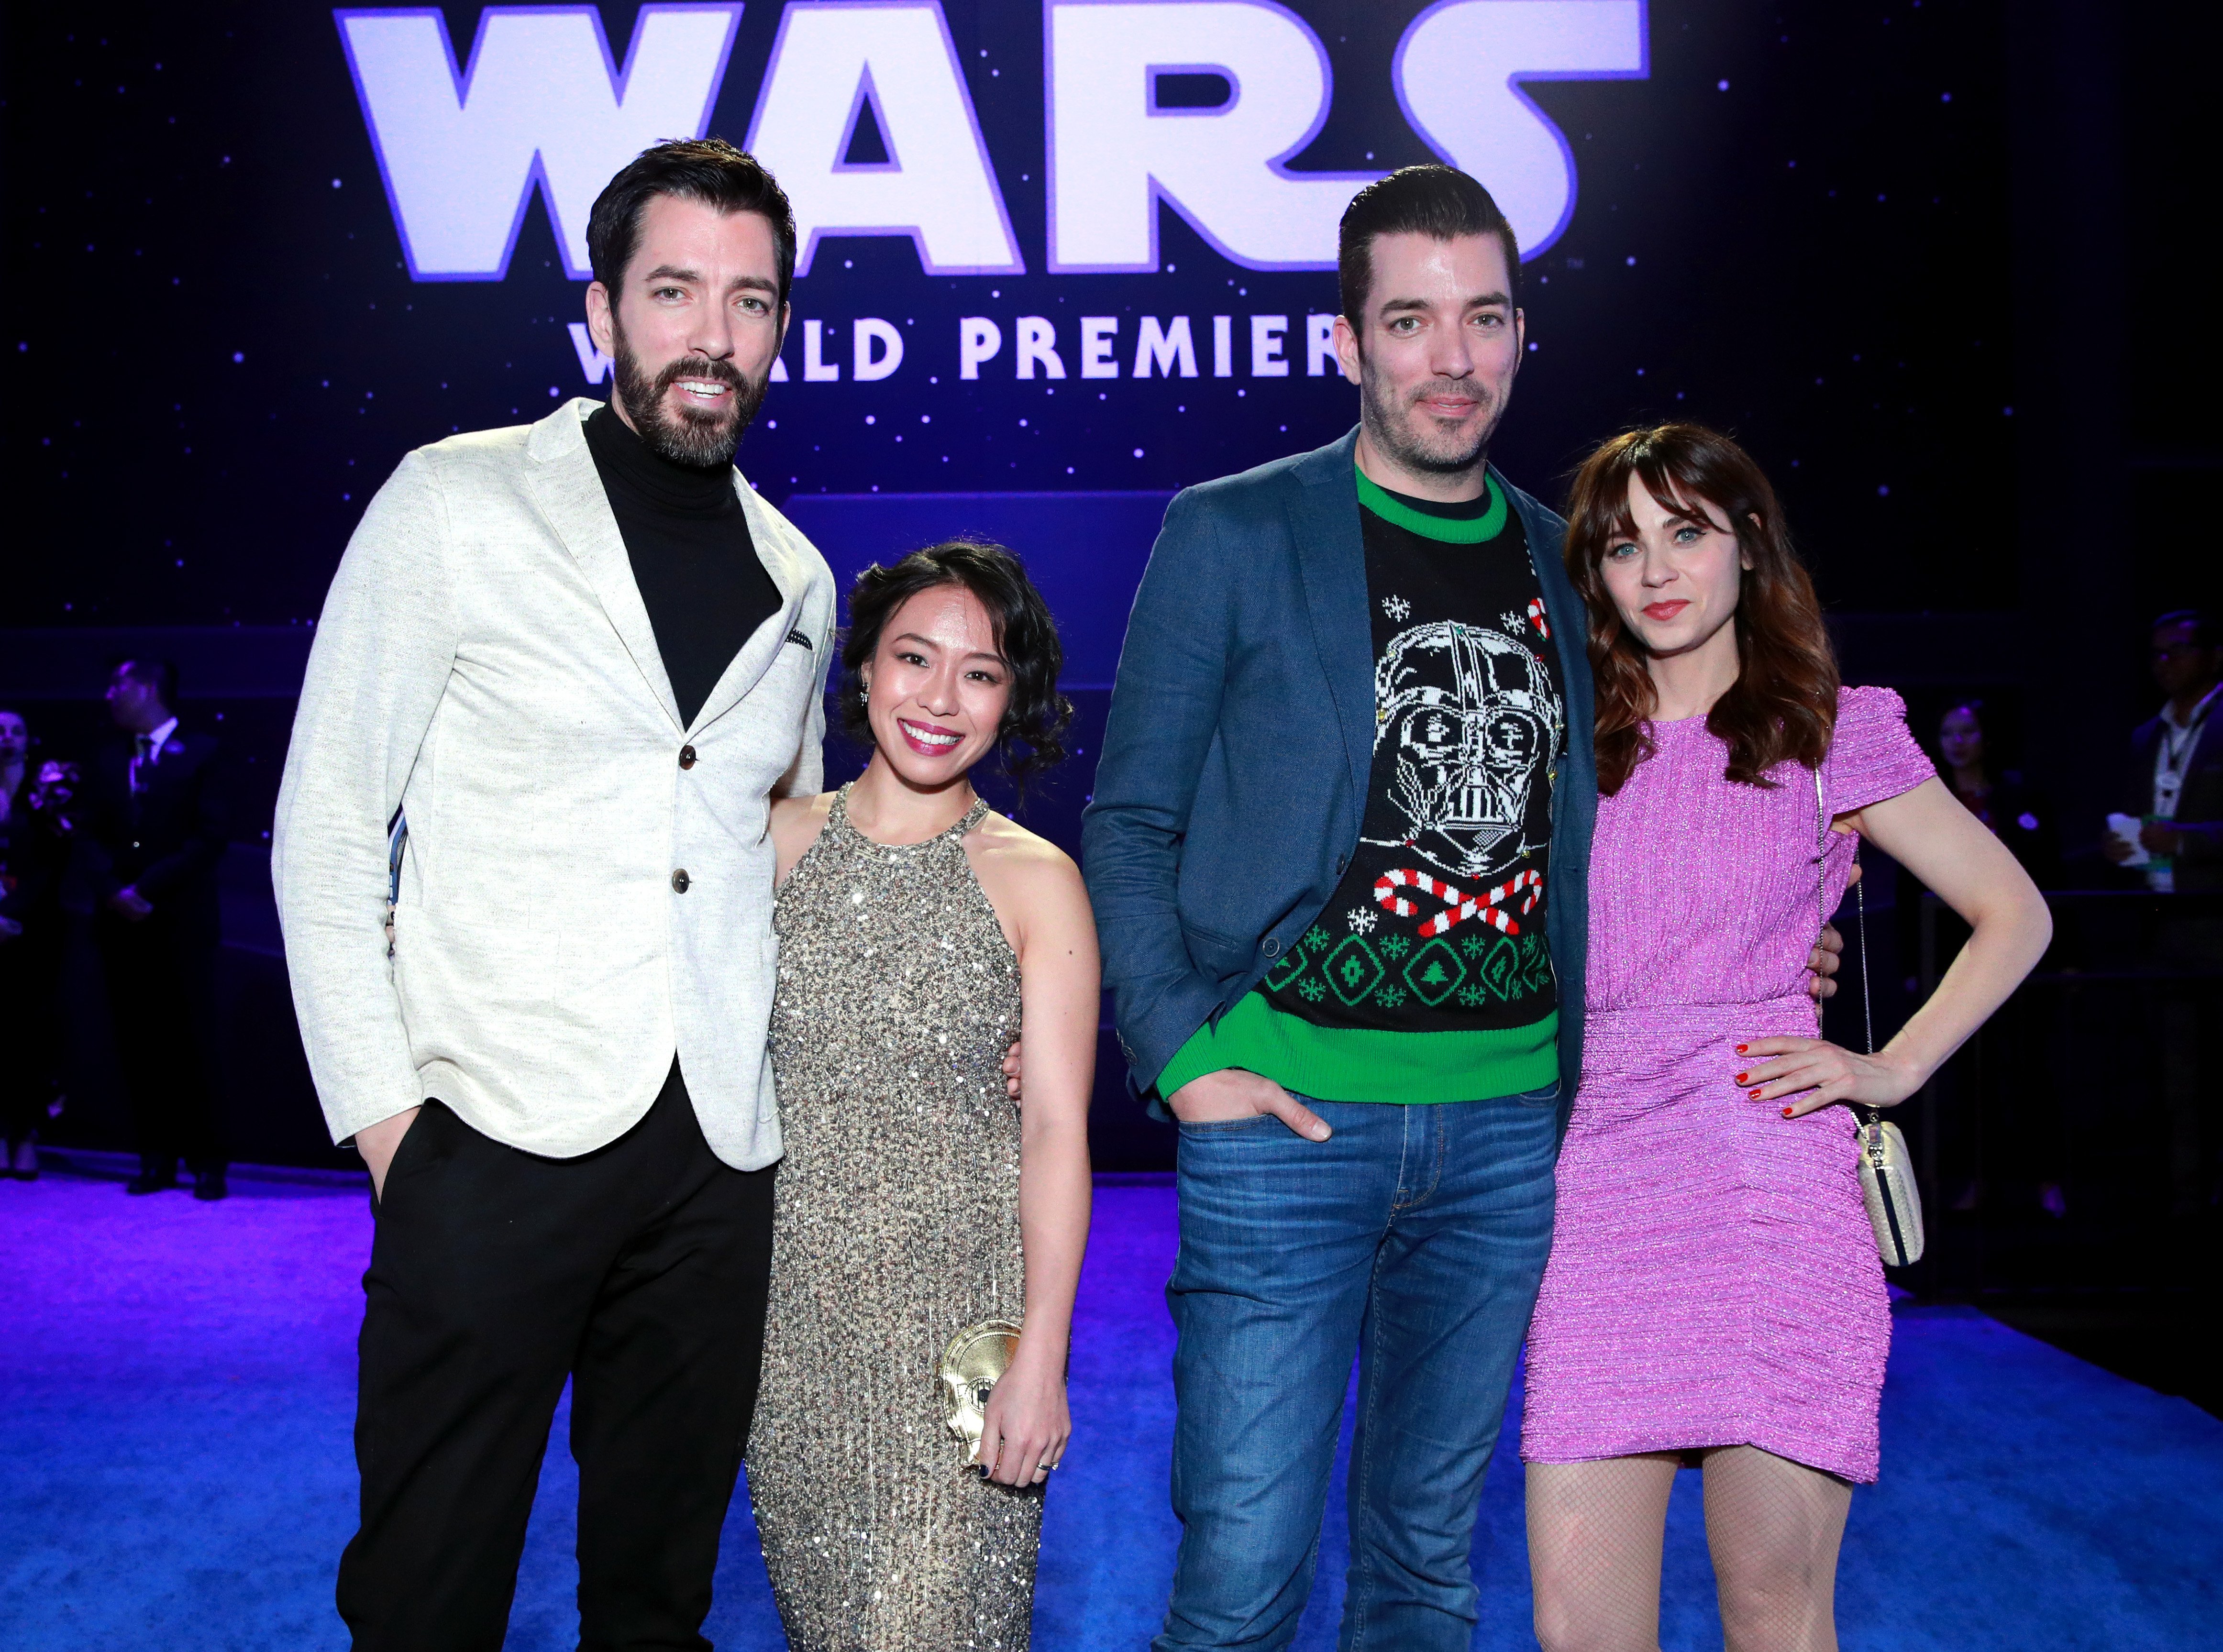 "Property Brothers" stars Drew and Jonathan Scott with Linda Phan and Zooey Deschanel on December 16, 2019 in Hollywood, California | Photo: Getty Images